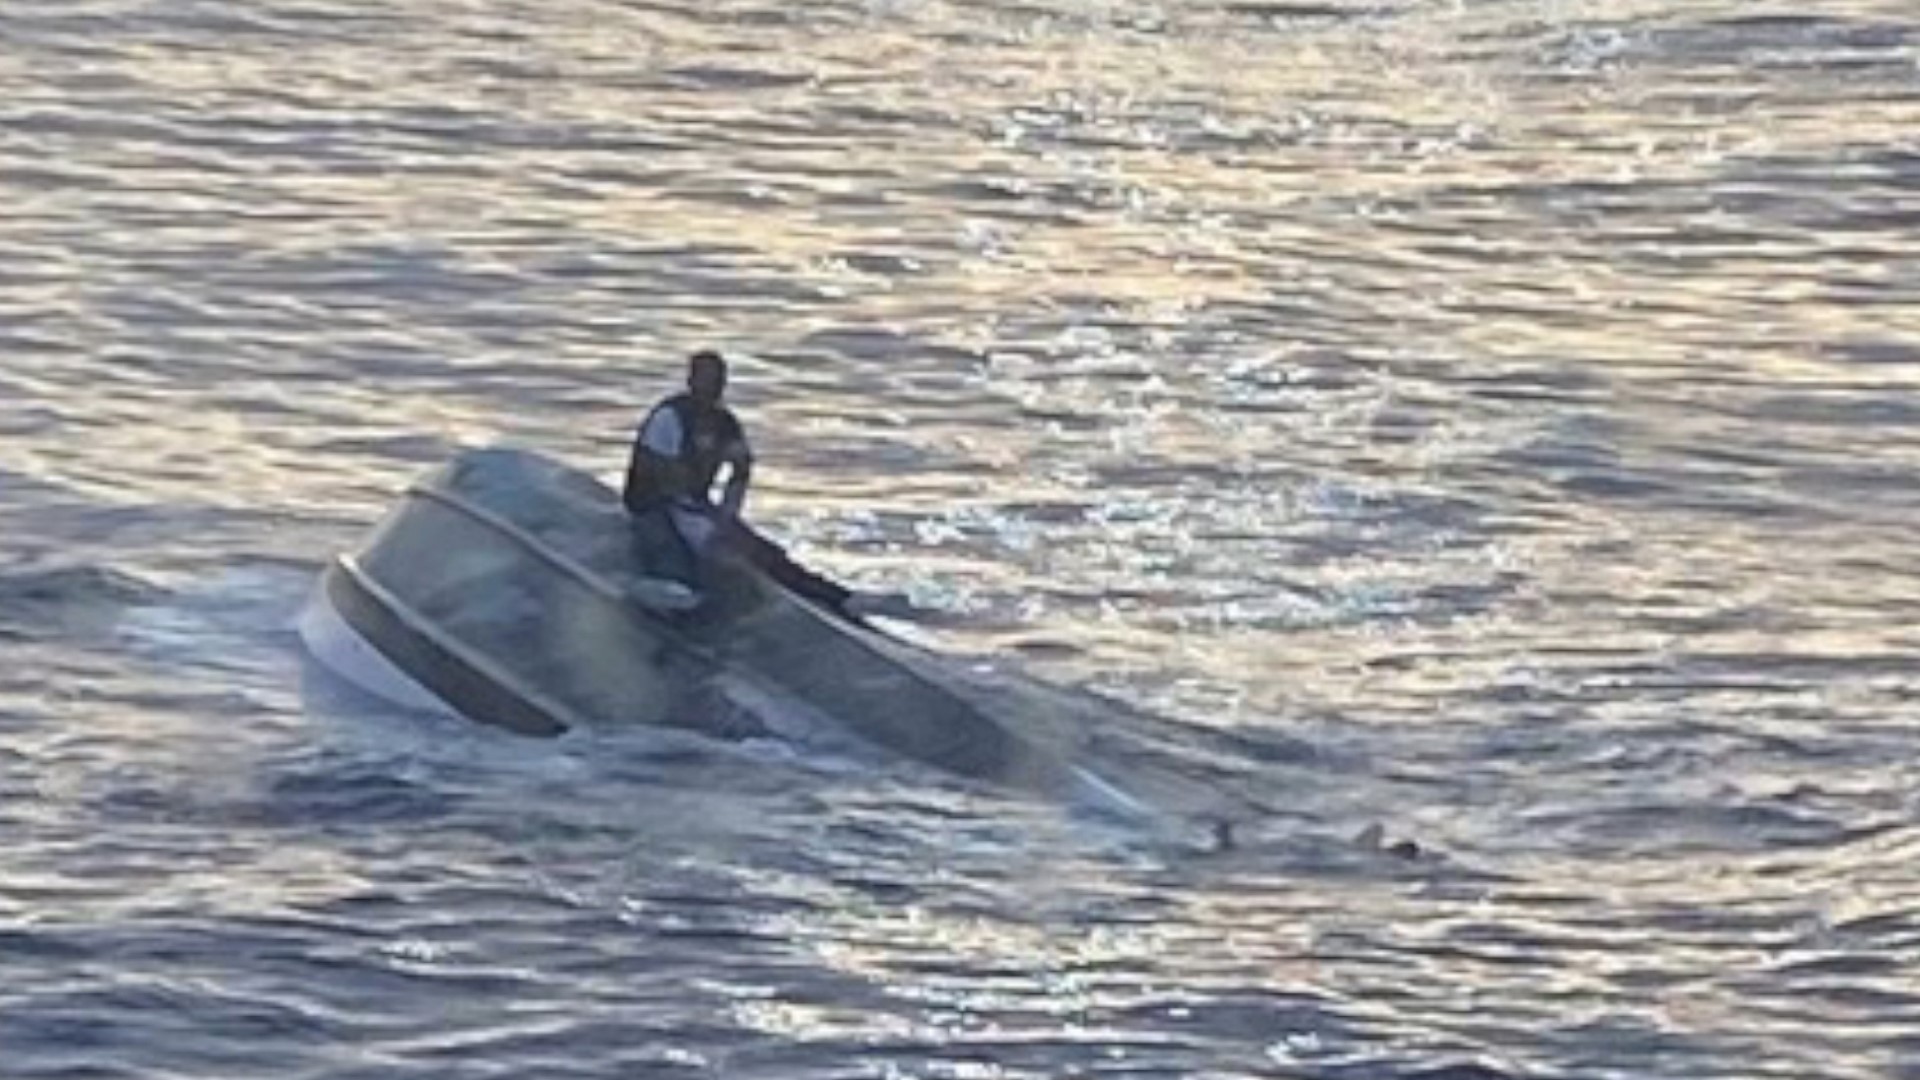 The US Coast Guard is searching for 39 missing people after their boat capsized off the coast of Florida on a suspected human smuggling trip. Veuer's Maria Mercedes Galuppo has the story.